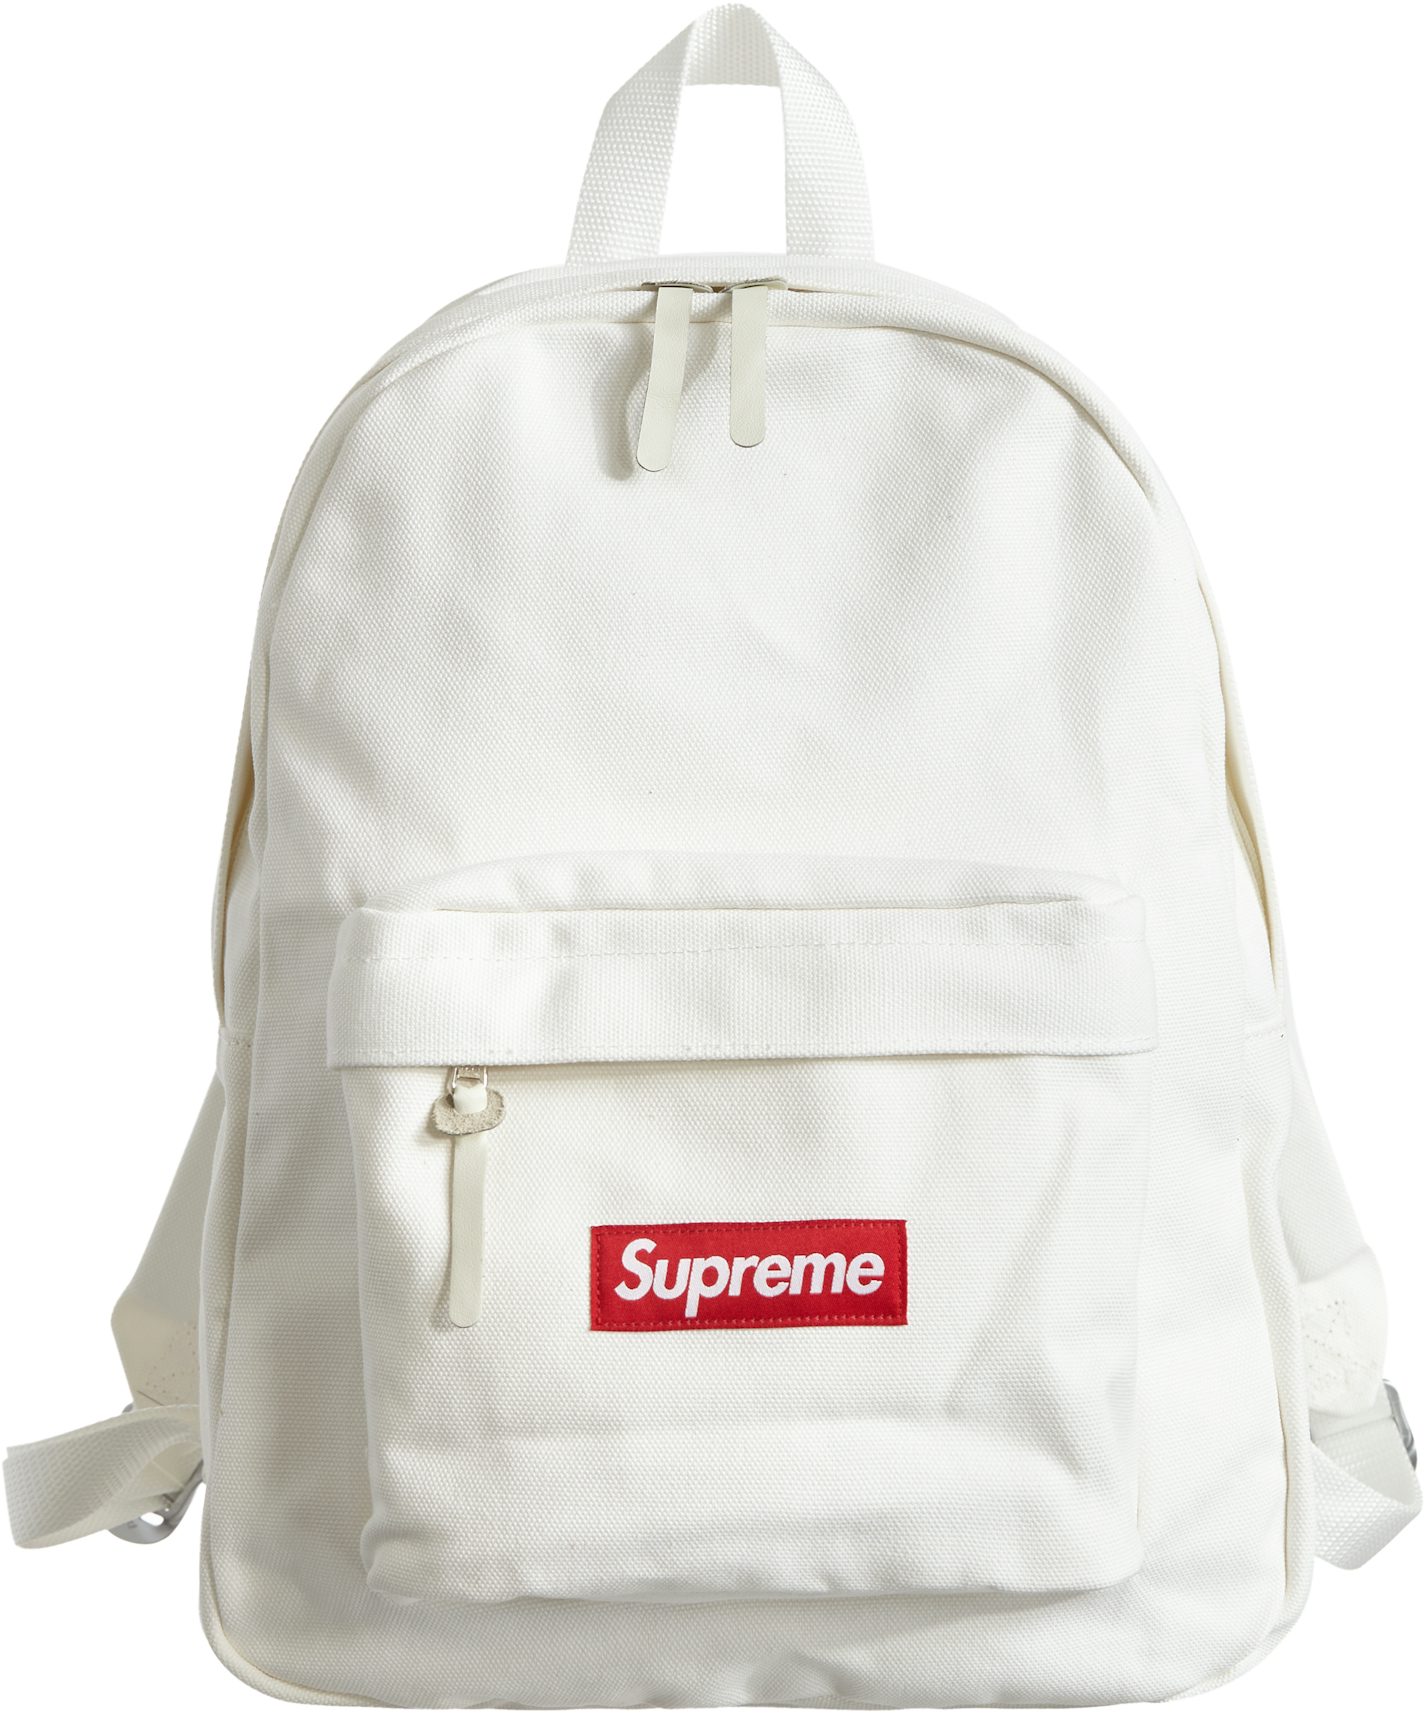 SUPREME CANVAS TOTE BAG FW20 BLACK - NEW SEALED 100% AUTH